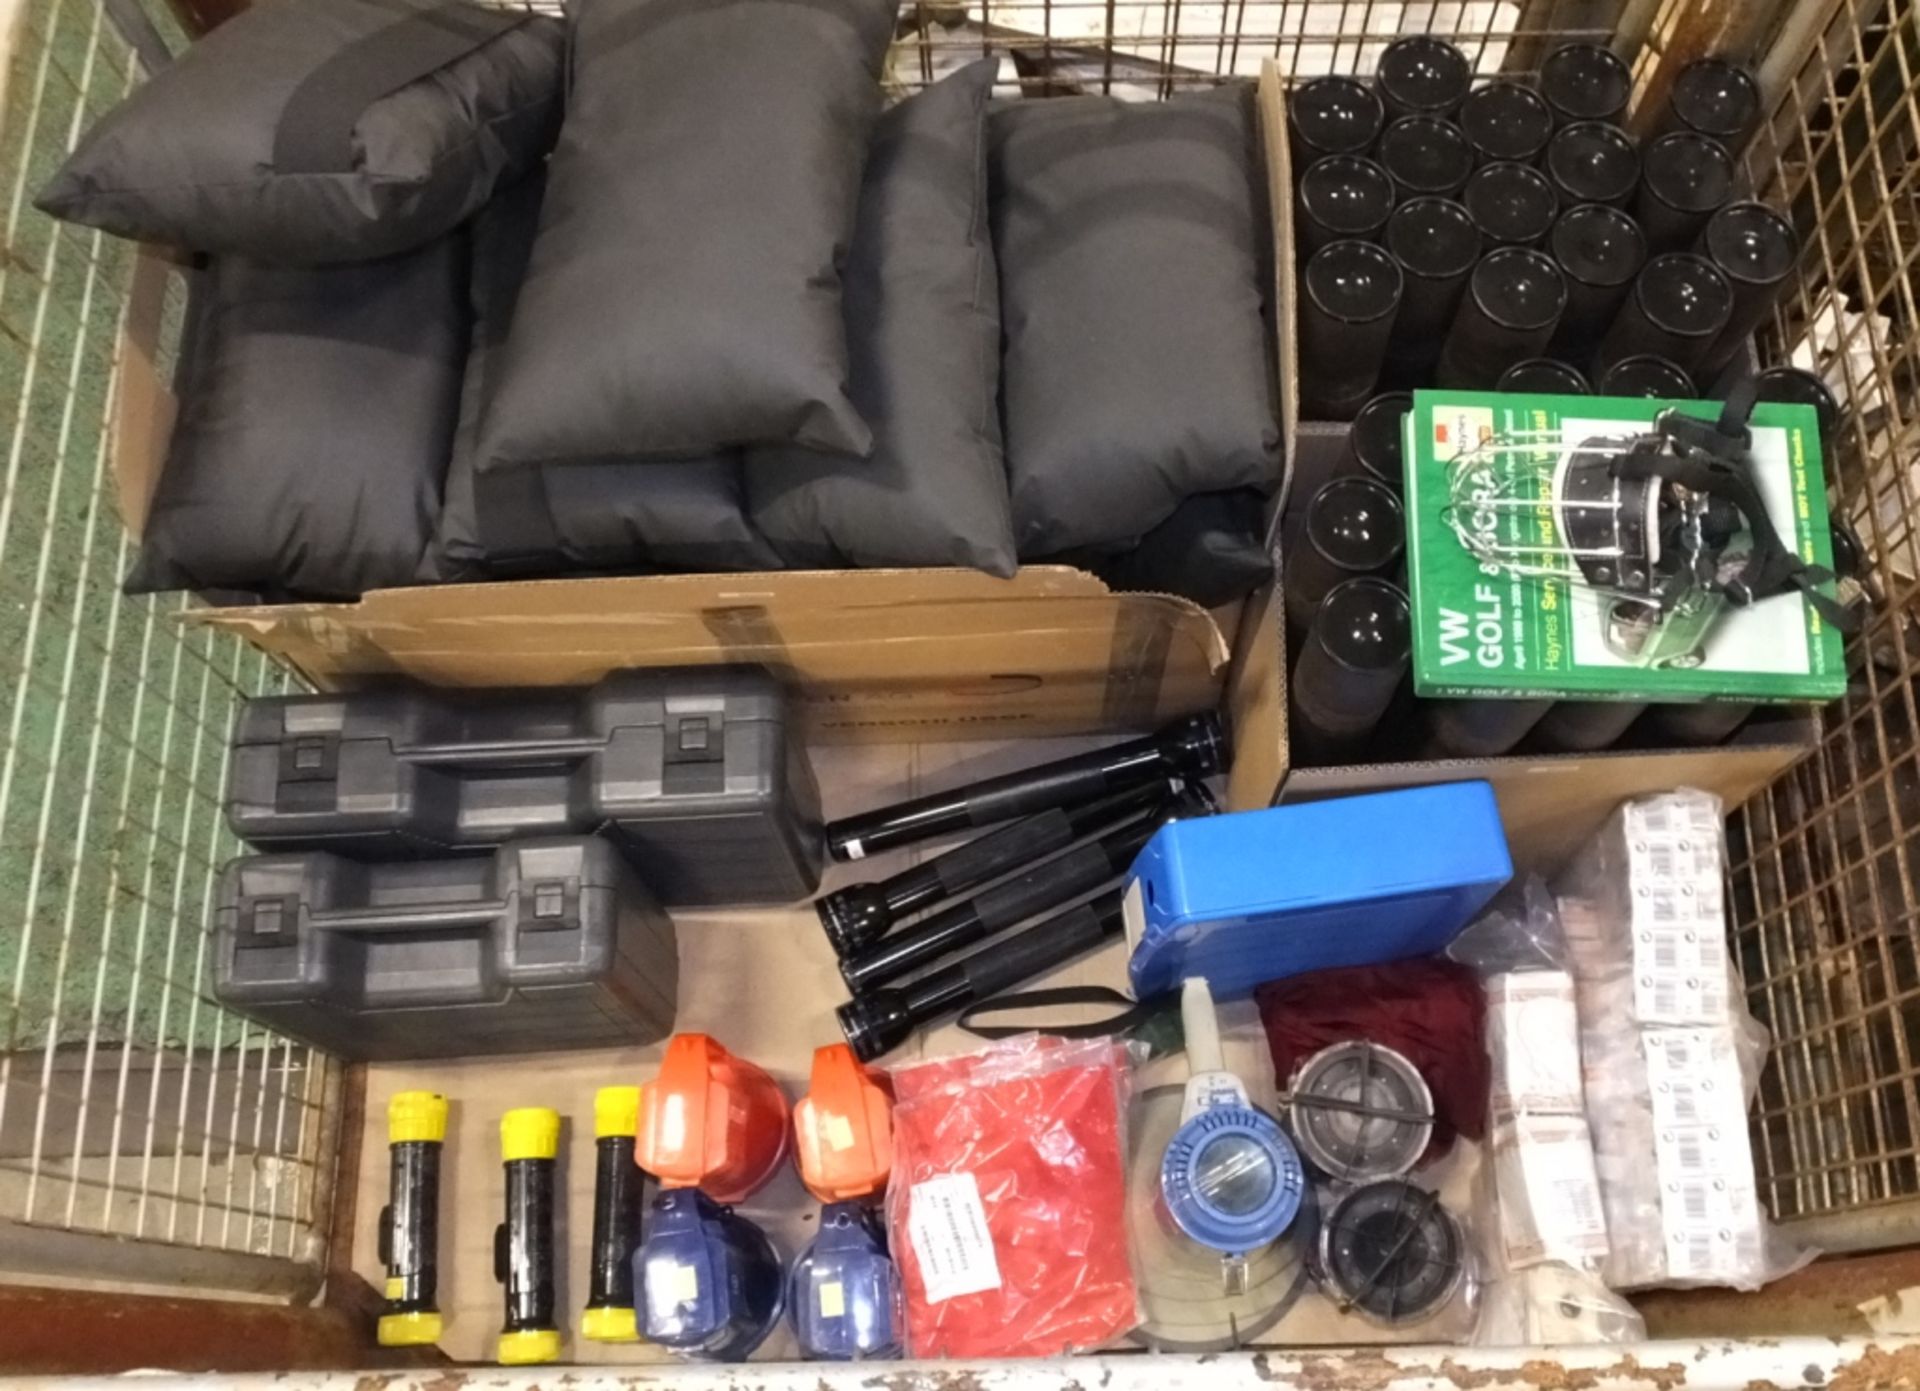 Cushions, courier tubes, dog muzzle, power tool cases, mag-lite torches, light bulbs, mega - Image 2 of 10